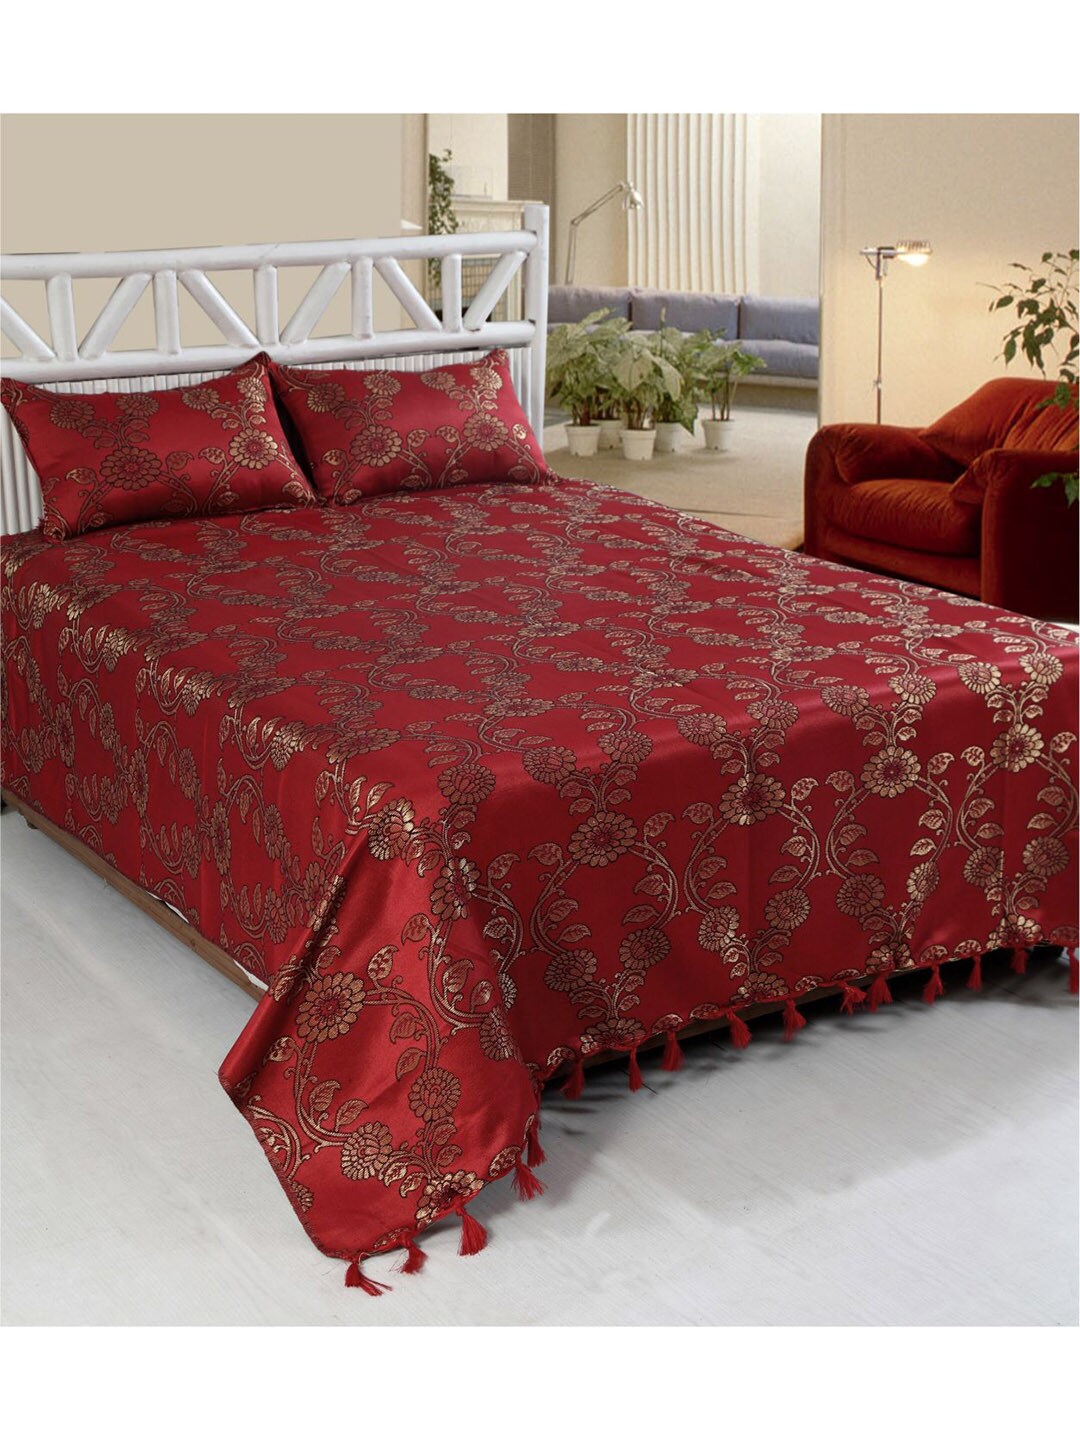 Varde Unisex Maroon & Gold Colored Woven Design Double King Bed Cover With 2 Pillow Covers Price in India